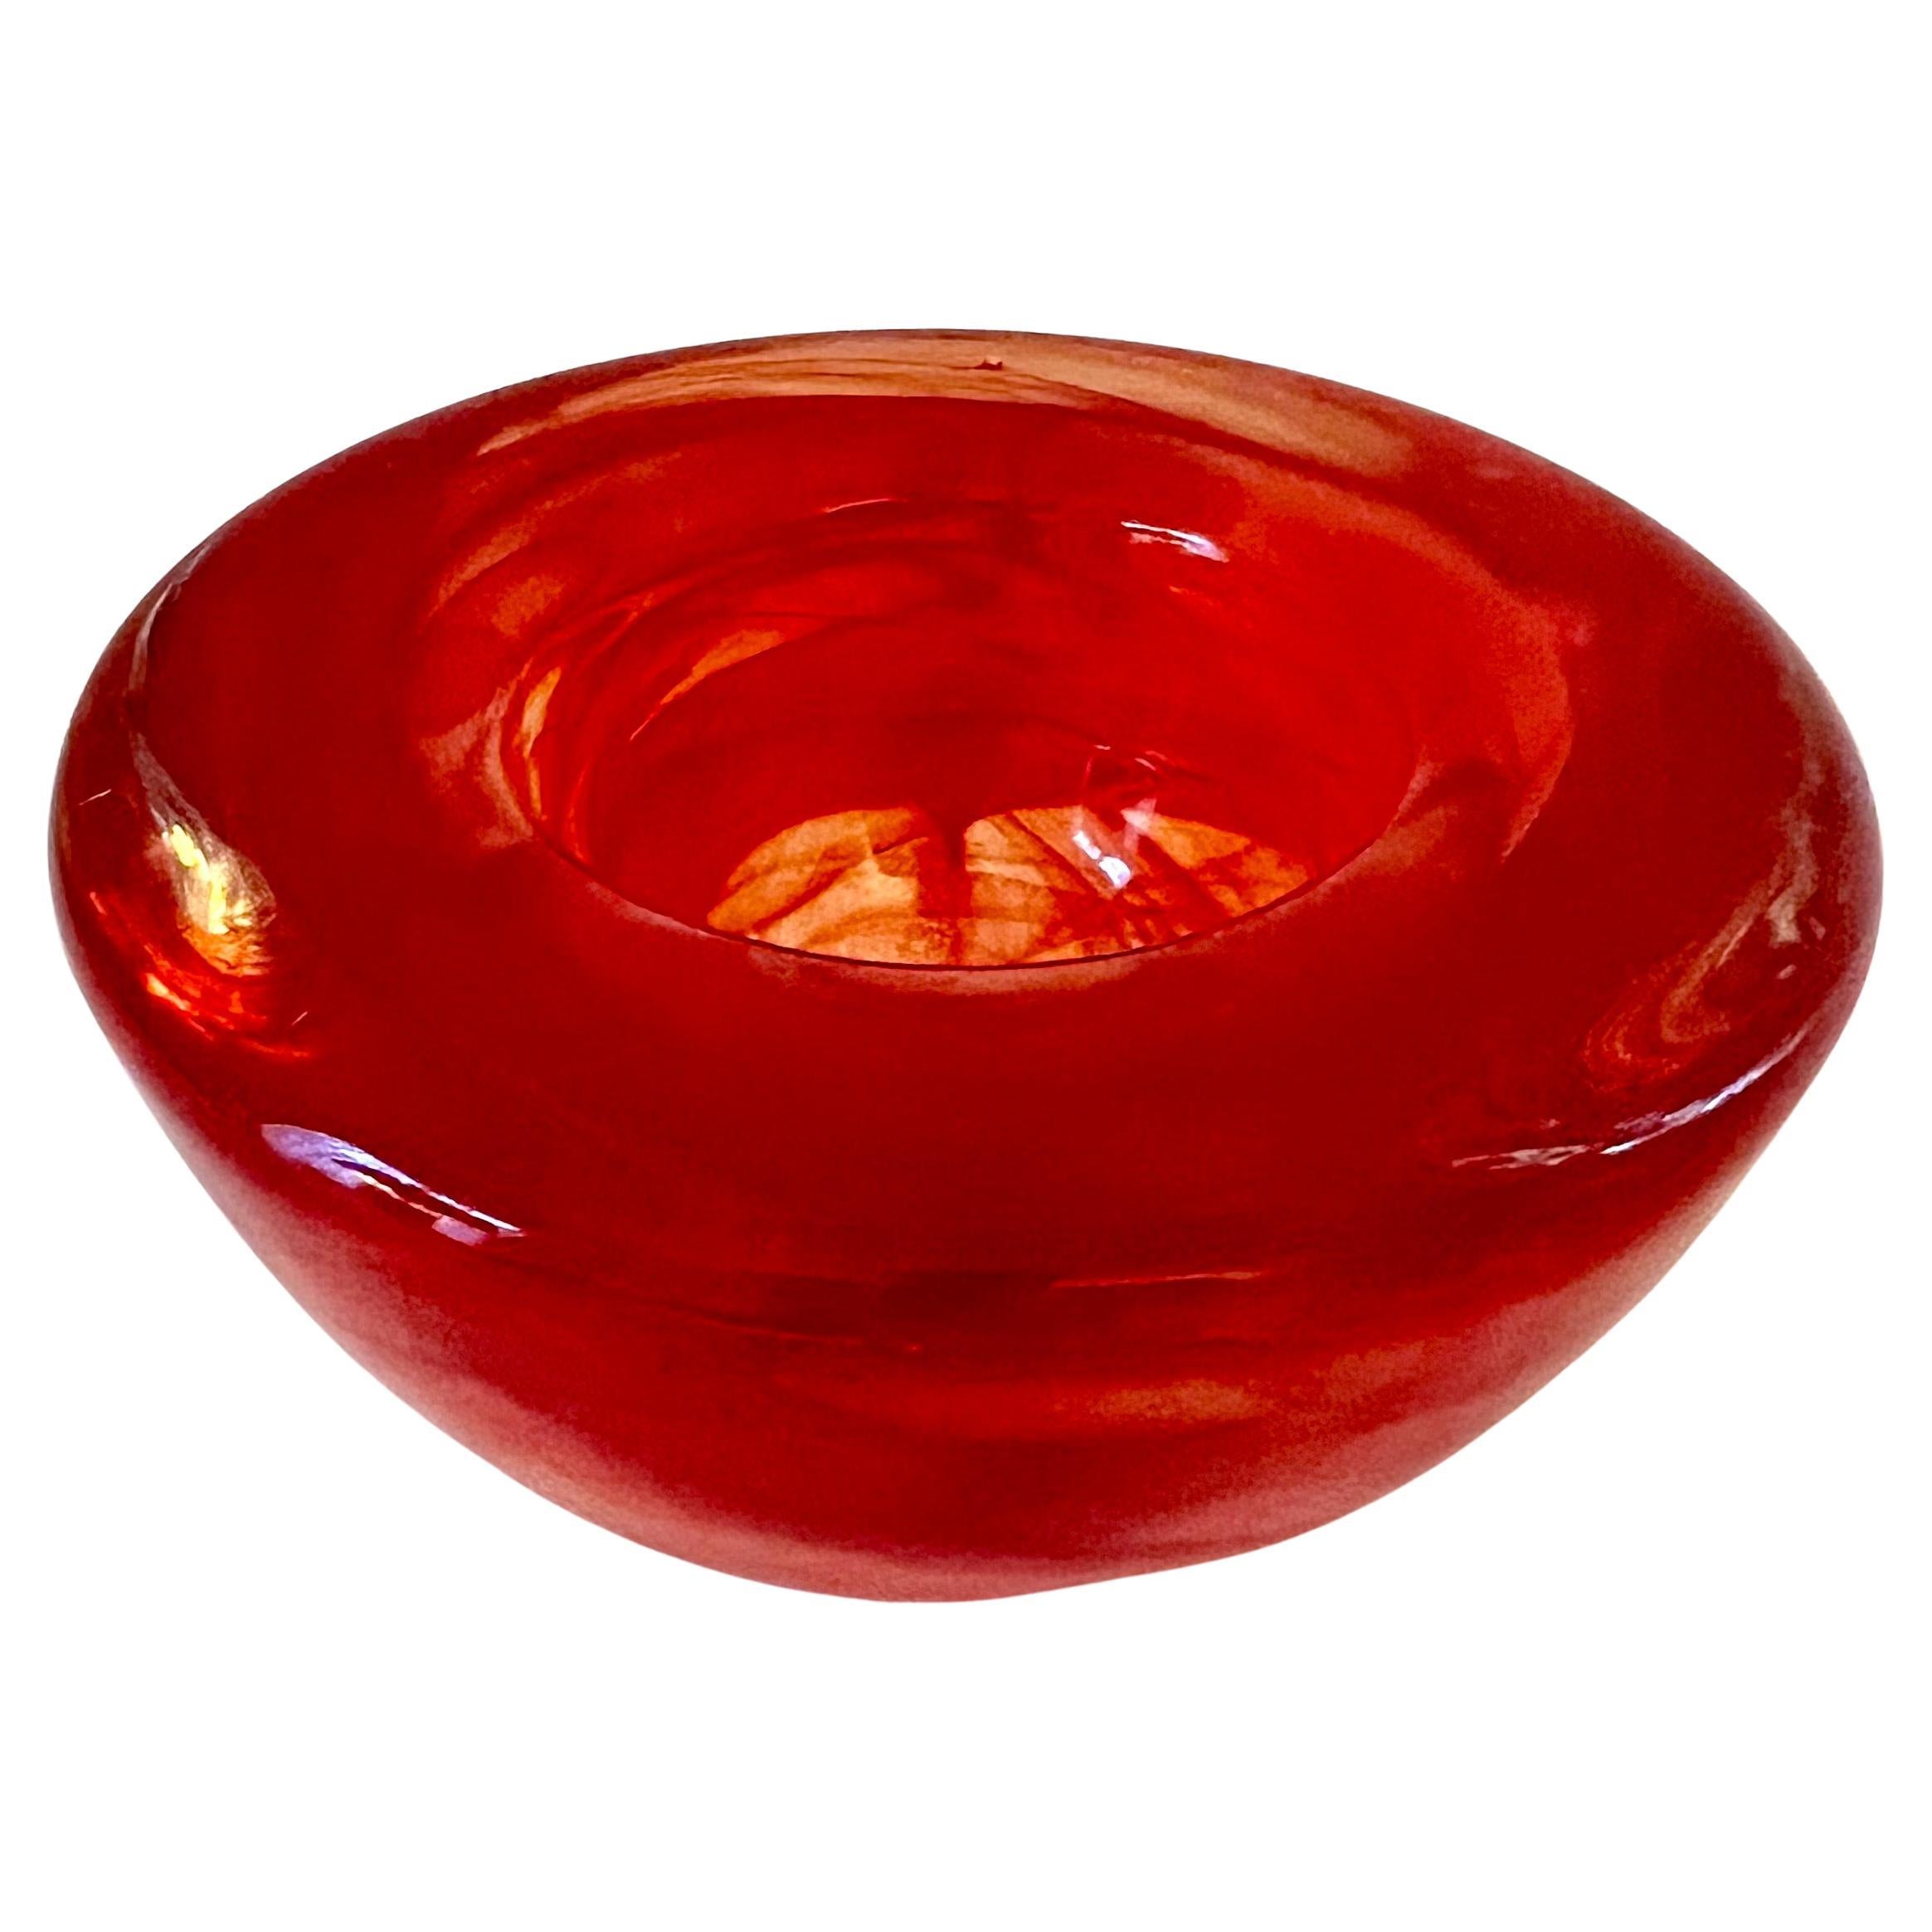 A very colorful hand crafted blown glass bowl by Anna Ehrner for Kosta Soda.

The bowl is small but has a great look and statement. - could be used for multiple purposes, including a votive, office supplies at a work station, floating a bud or desk